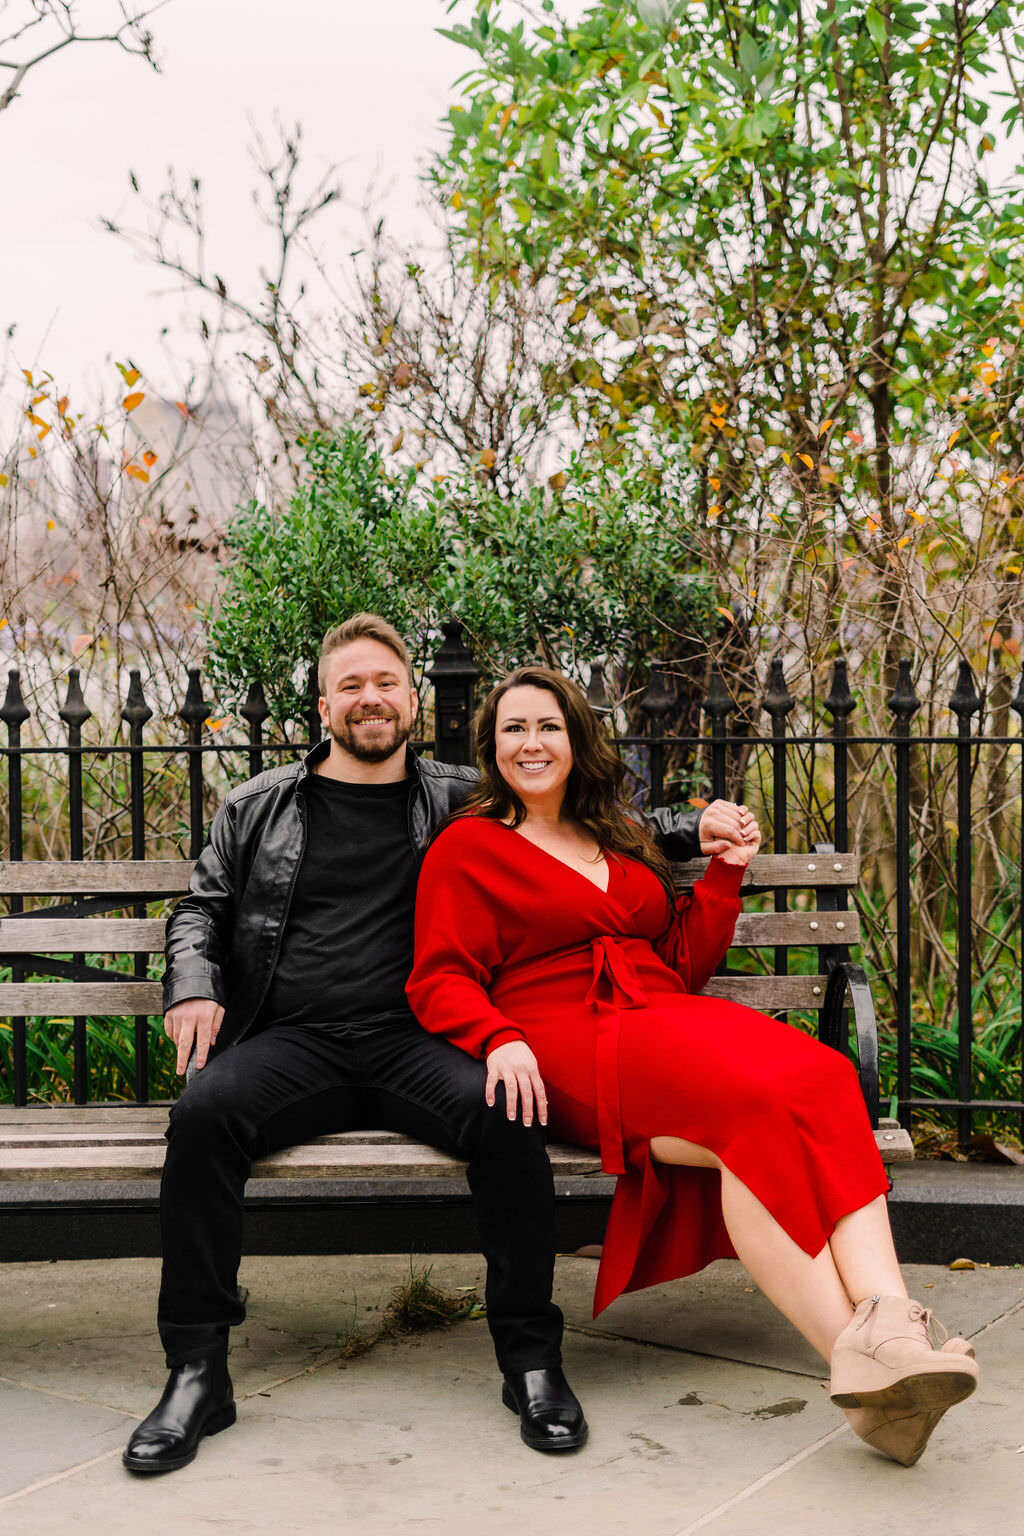 couple sitting on a park bench smiling as the woman leans up against the man